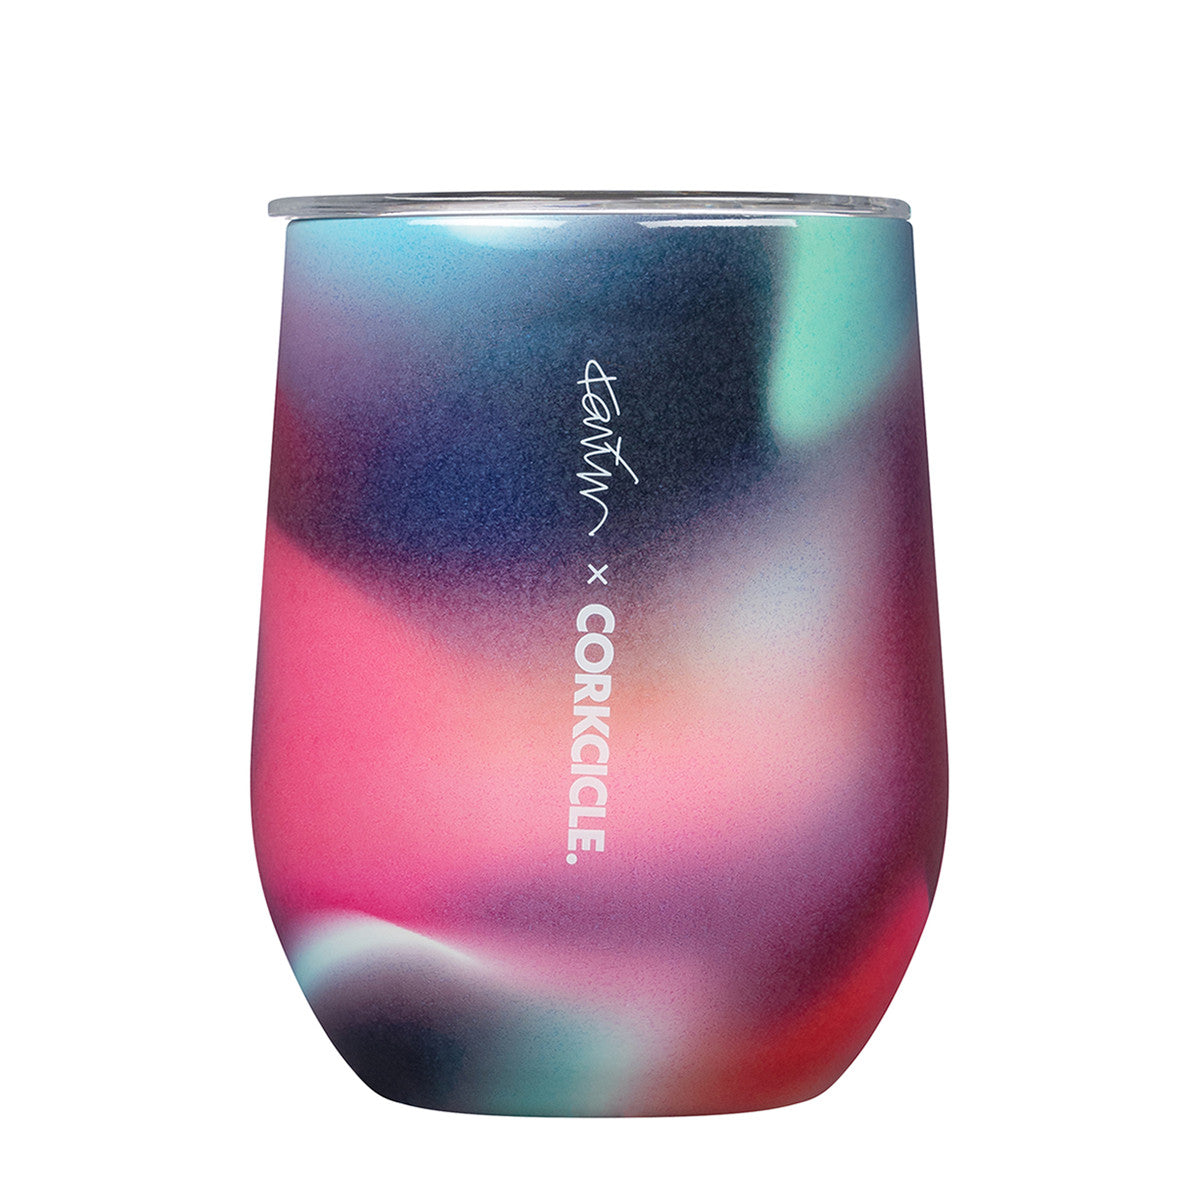 CORKCICLE x KARIM RASHID Classic Stemless Insulated Stainless Steel Cup 355ml - Glamdisco **CLEARANCE**